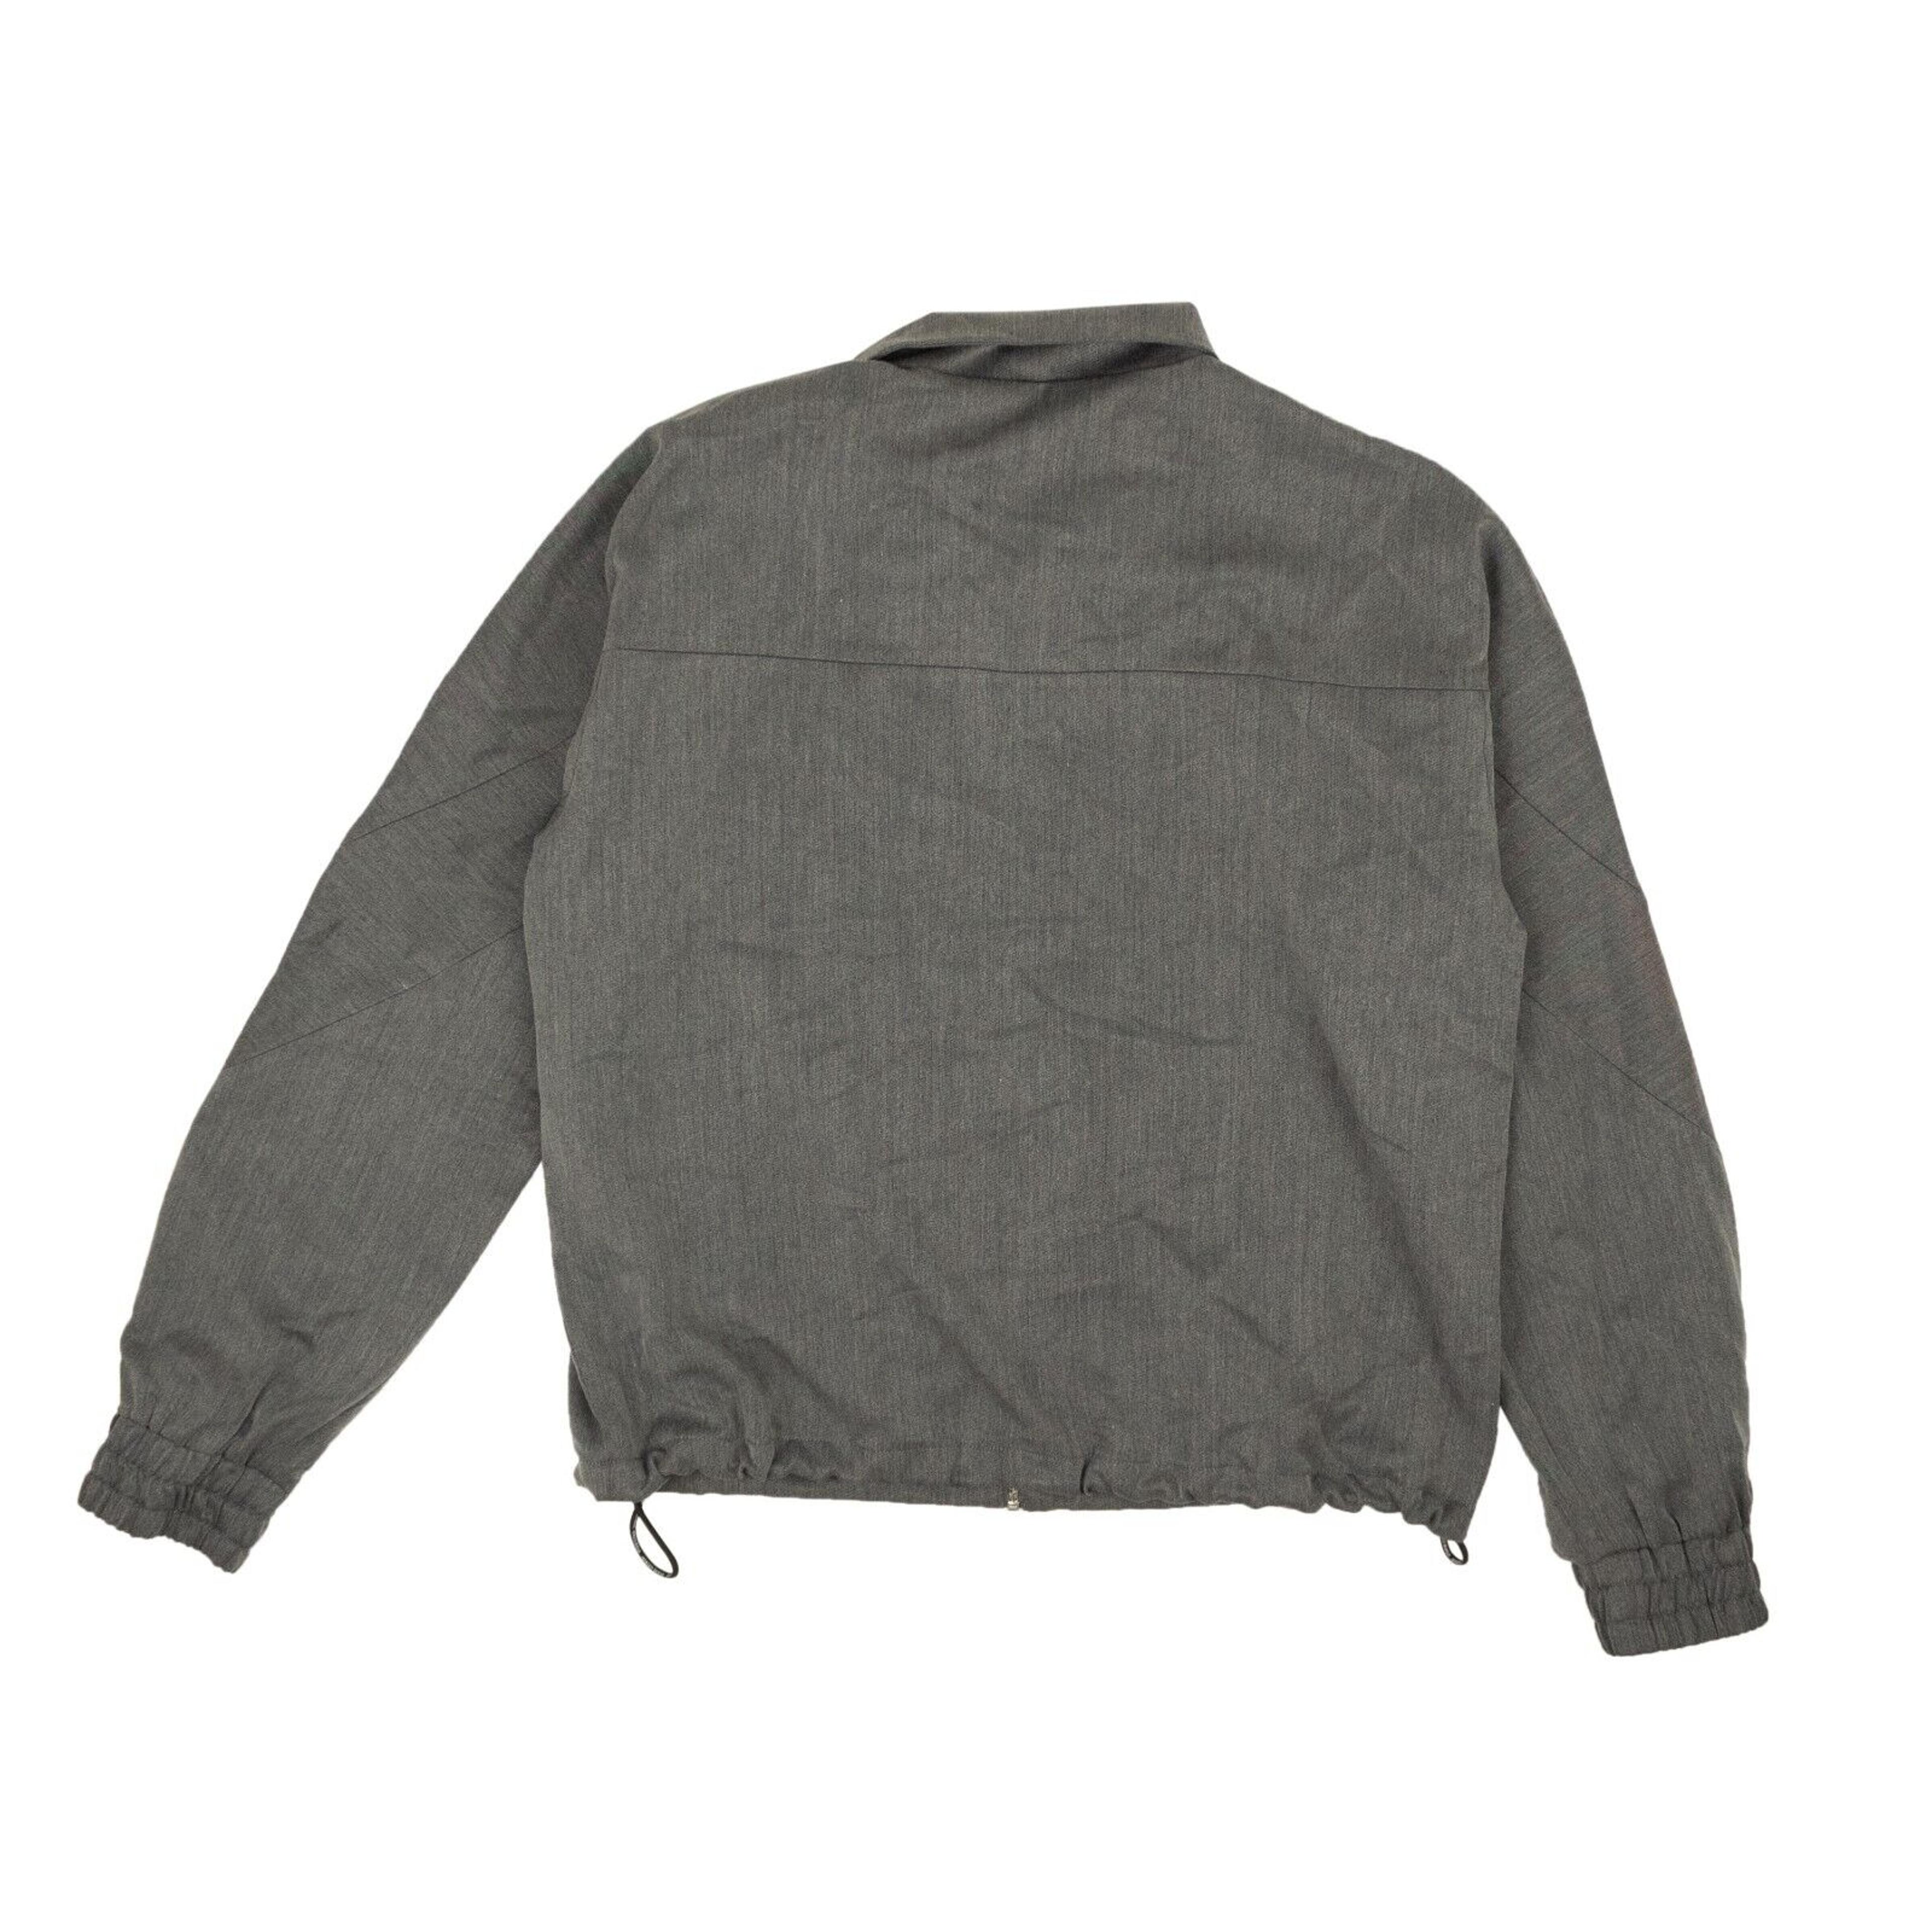 Alternate View 2 of Grey Polyester Tailoring Warm-Up Jacket